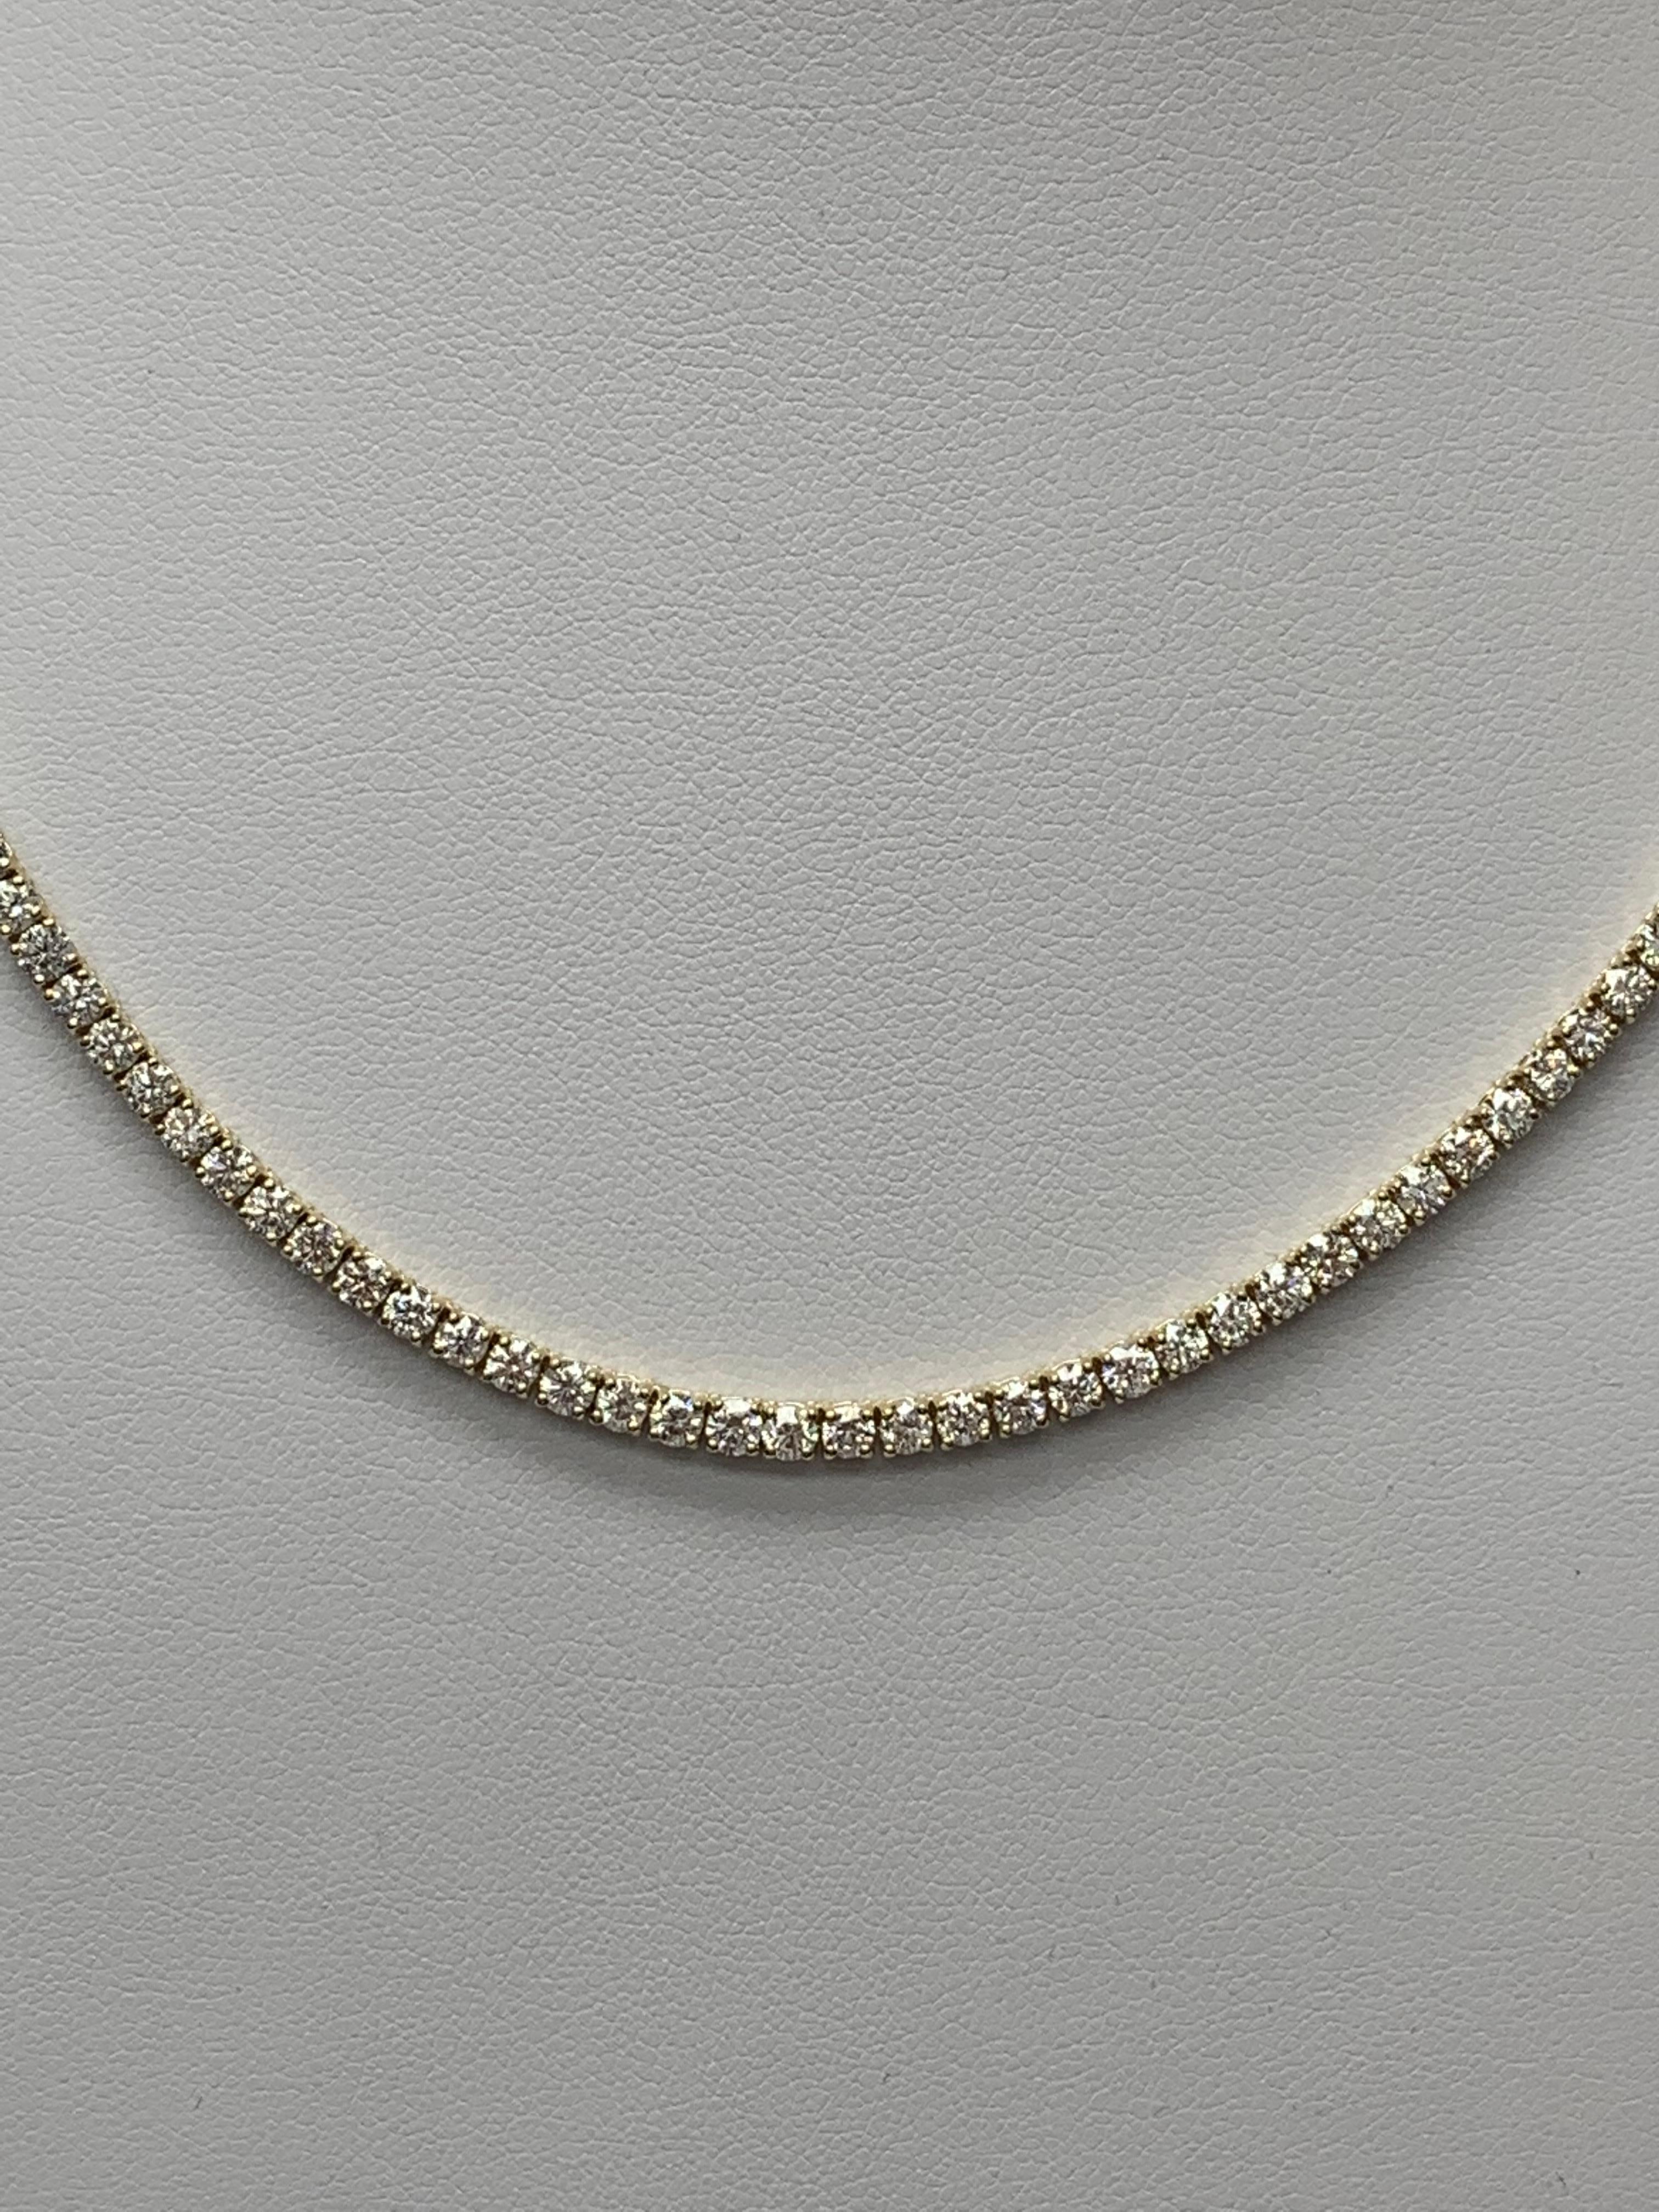 Modern 11.31 Carat Diamond Tennis Necklace in 14K Yellow Gold For Sale